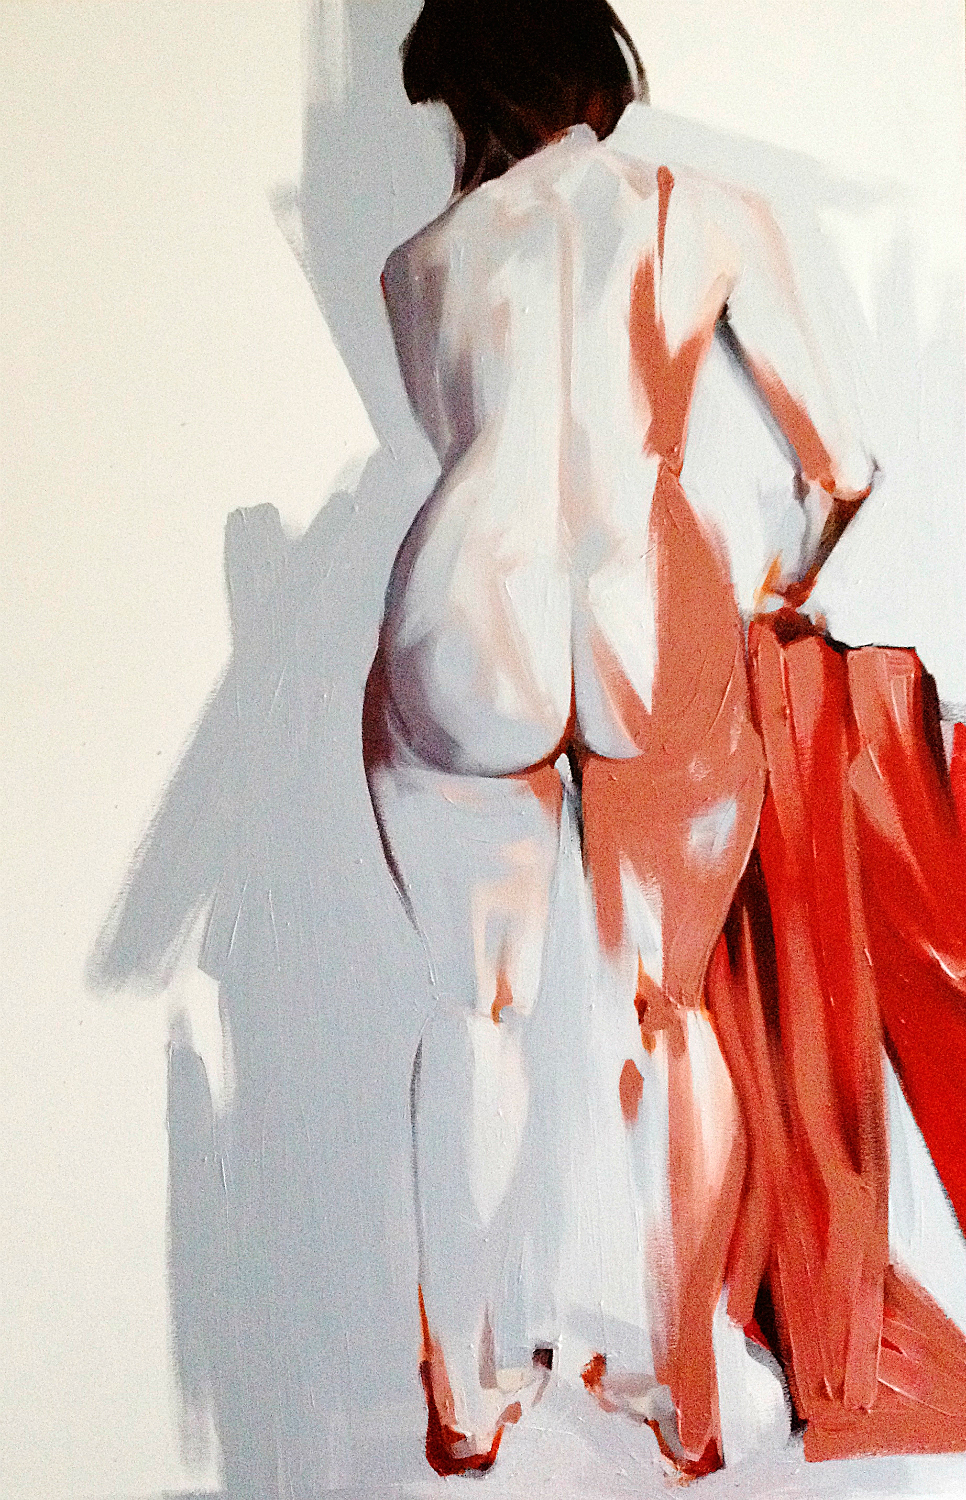 Nicole Trimble, Red #1, 2014. Oil on Canvas, 58 x 38 in.